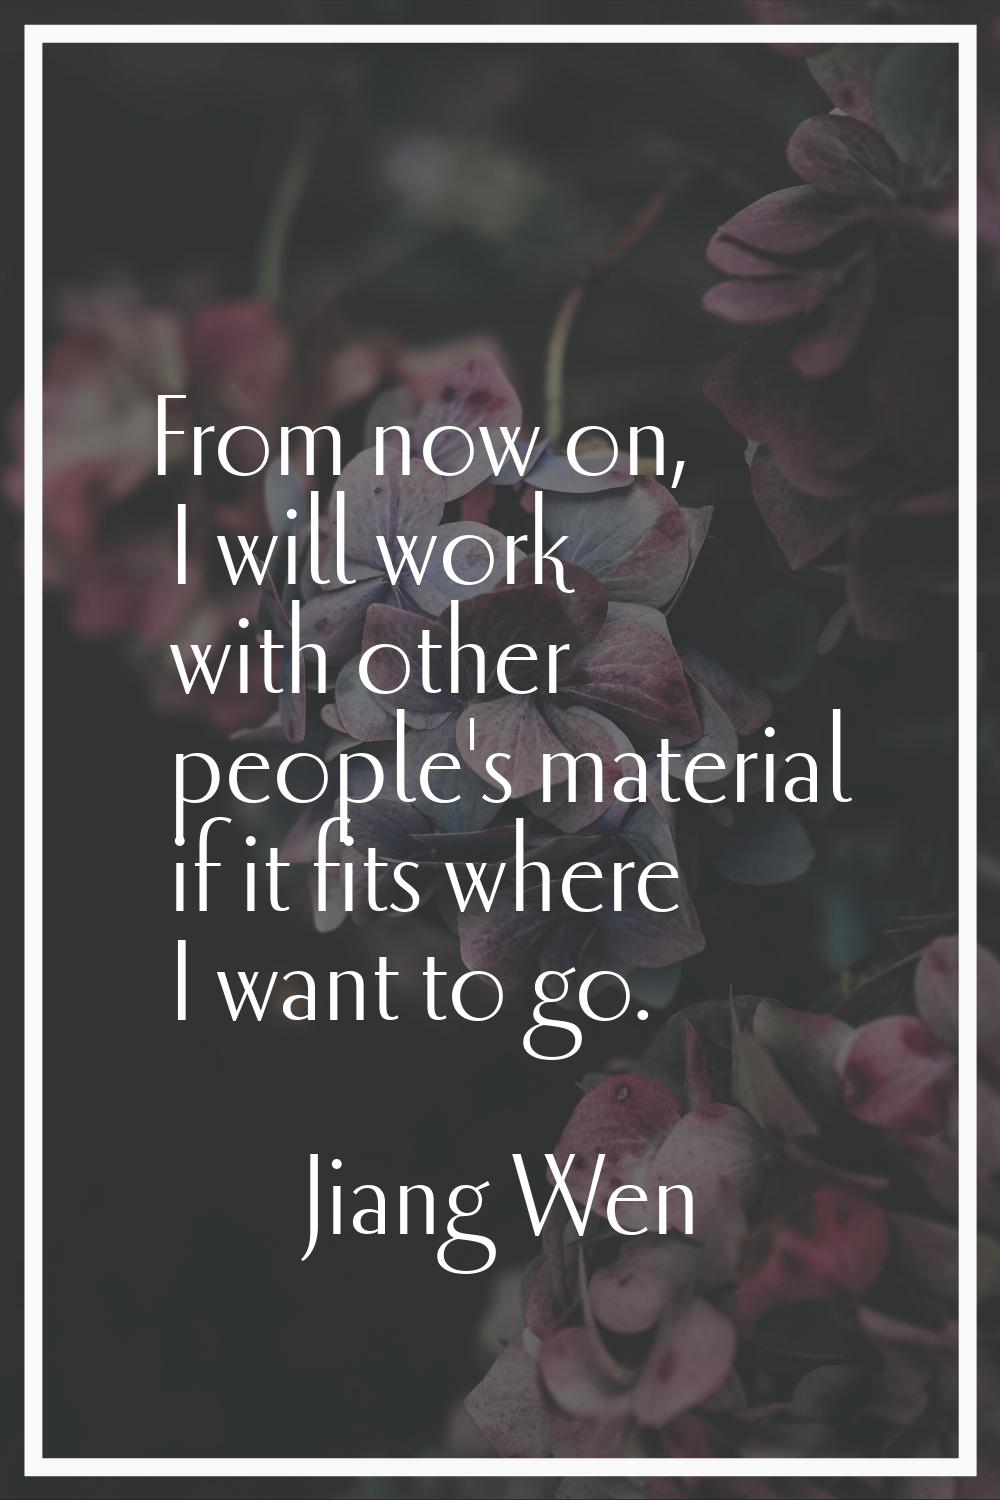 From now on, I will work with other people's material if it fits where I want to go.